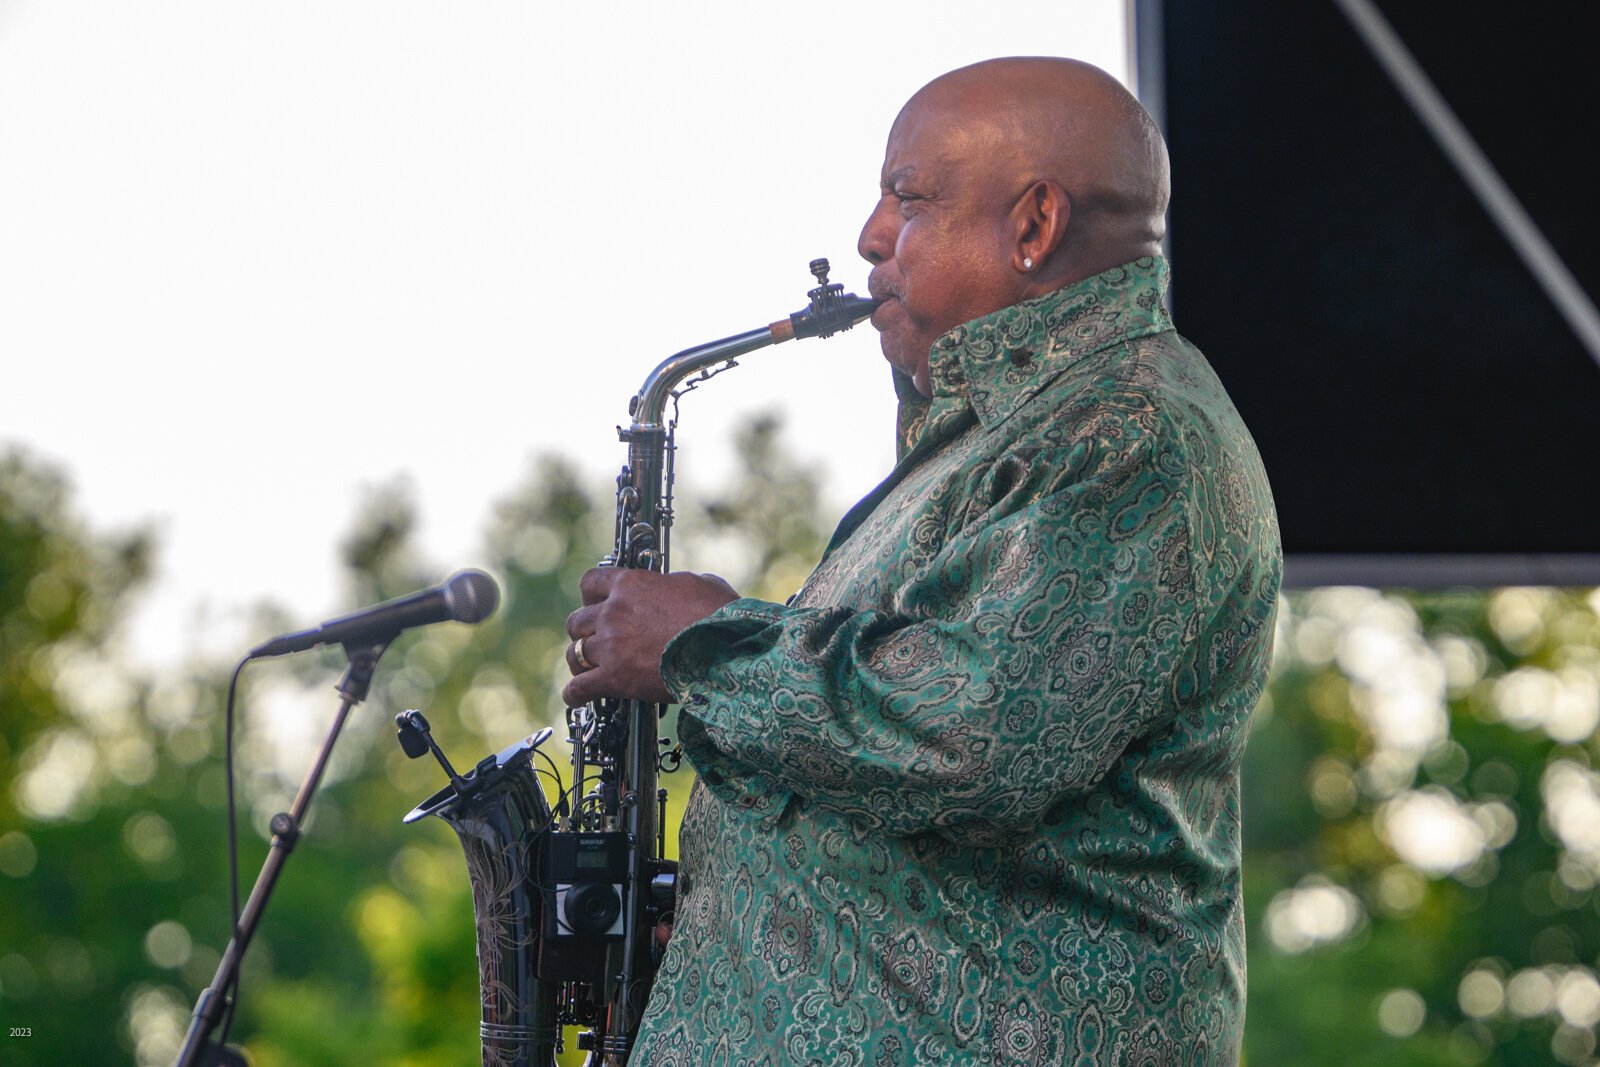 Gerald Albright performing at the John E. Lawrence Summer Jazz series.